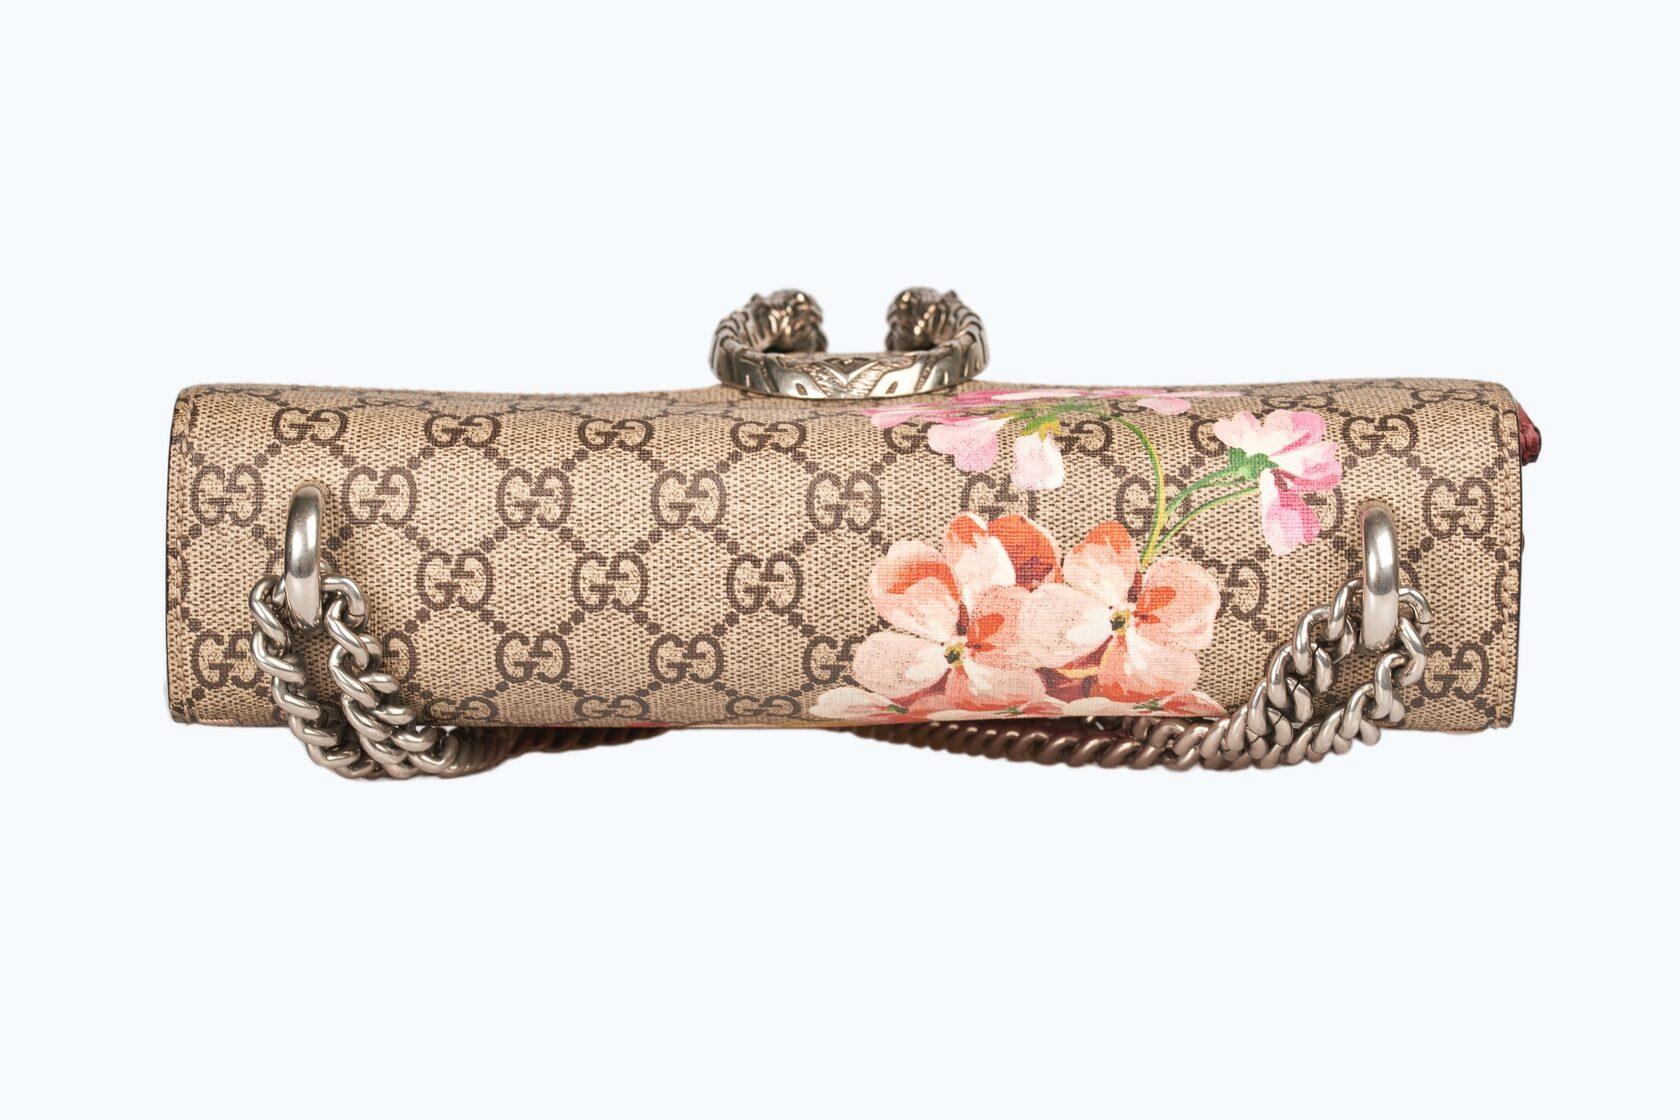 Gucci Dionysus GG Flora Blooms Small shoulder bag In Excellent Condition For Sale In Dover, DE